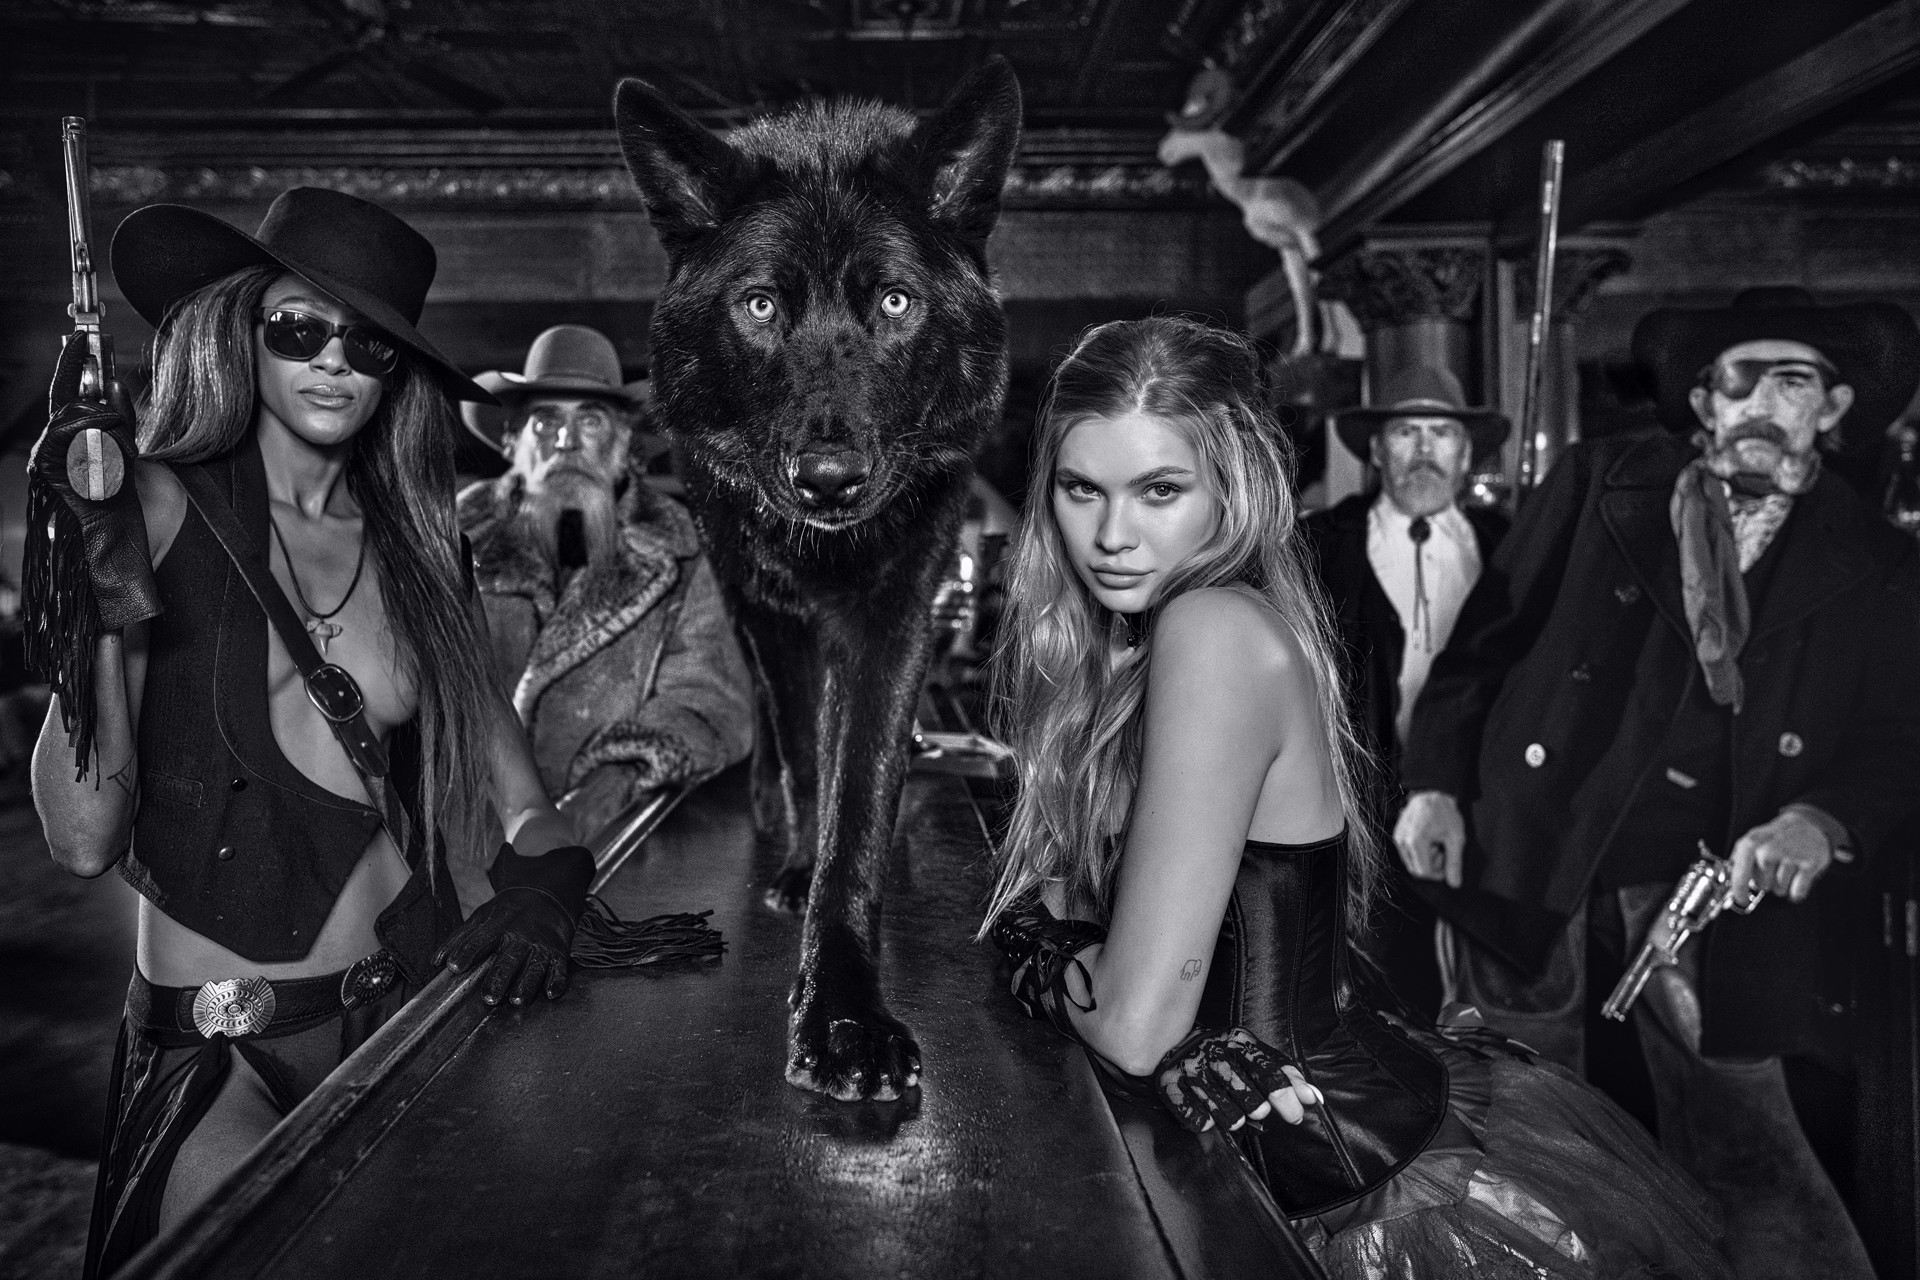 The Residents by David Yarrow